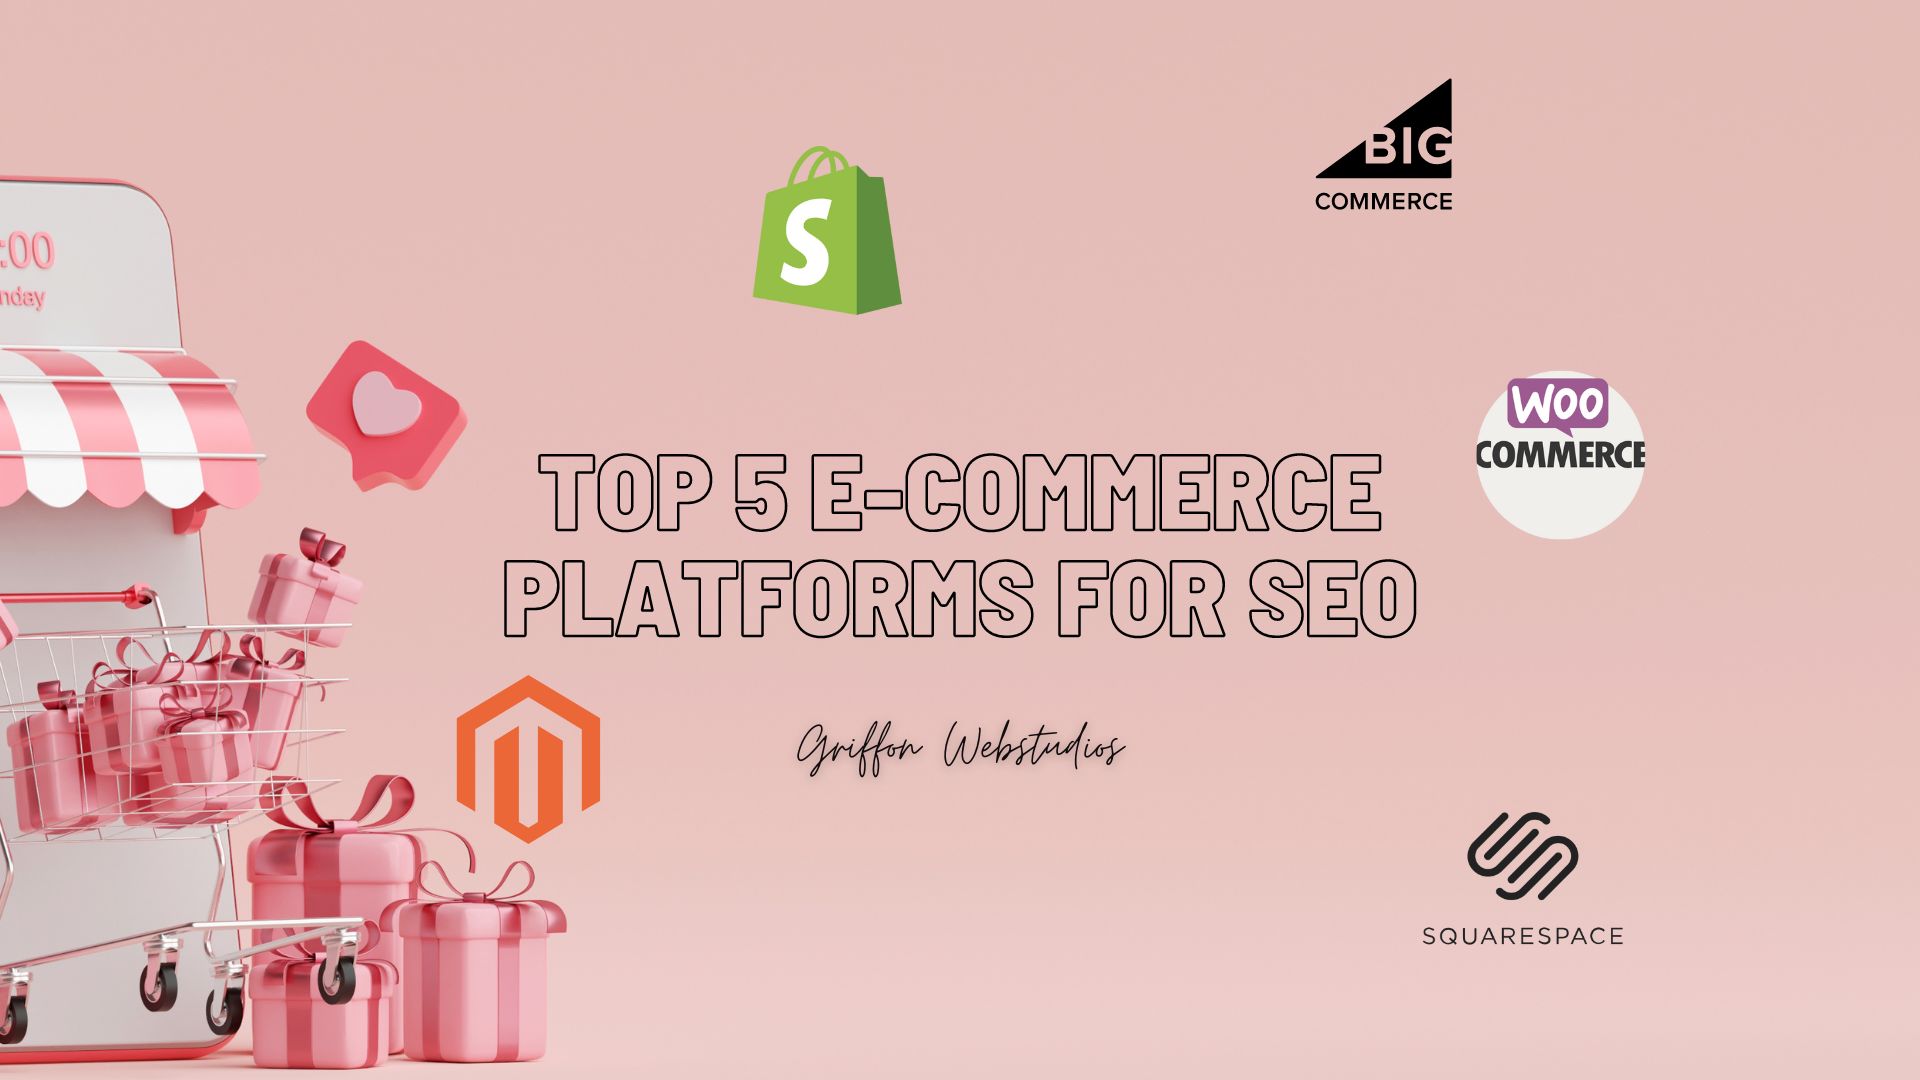 Top 5 ecommerce platforms for SEO